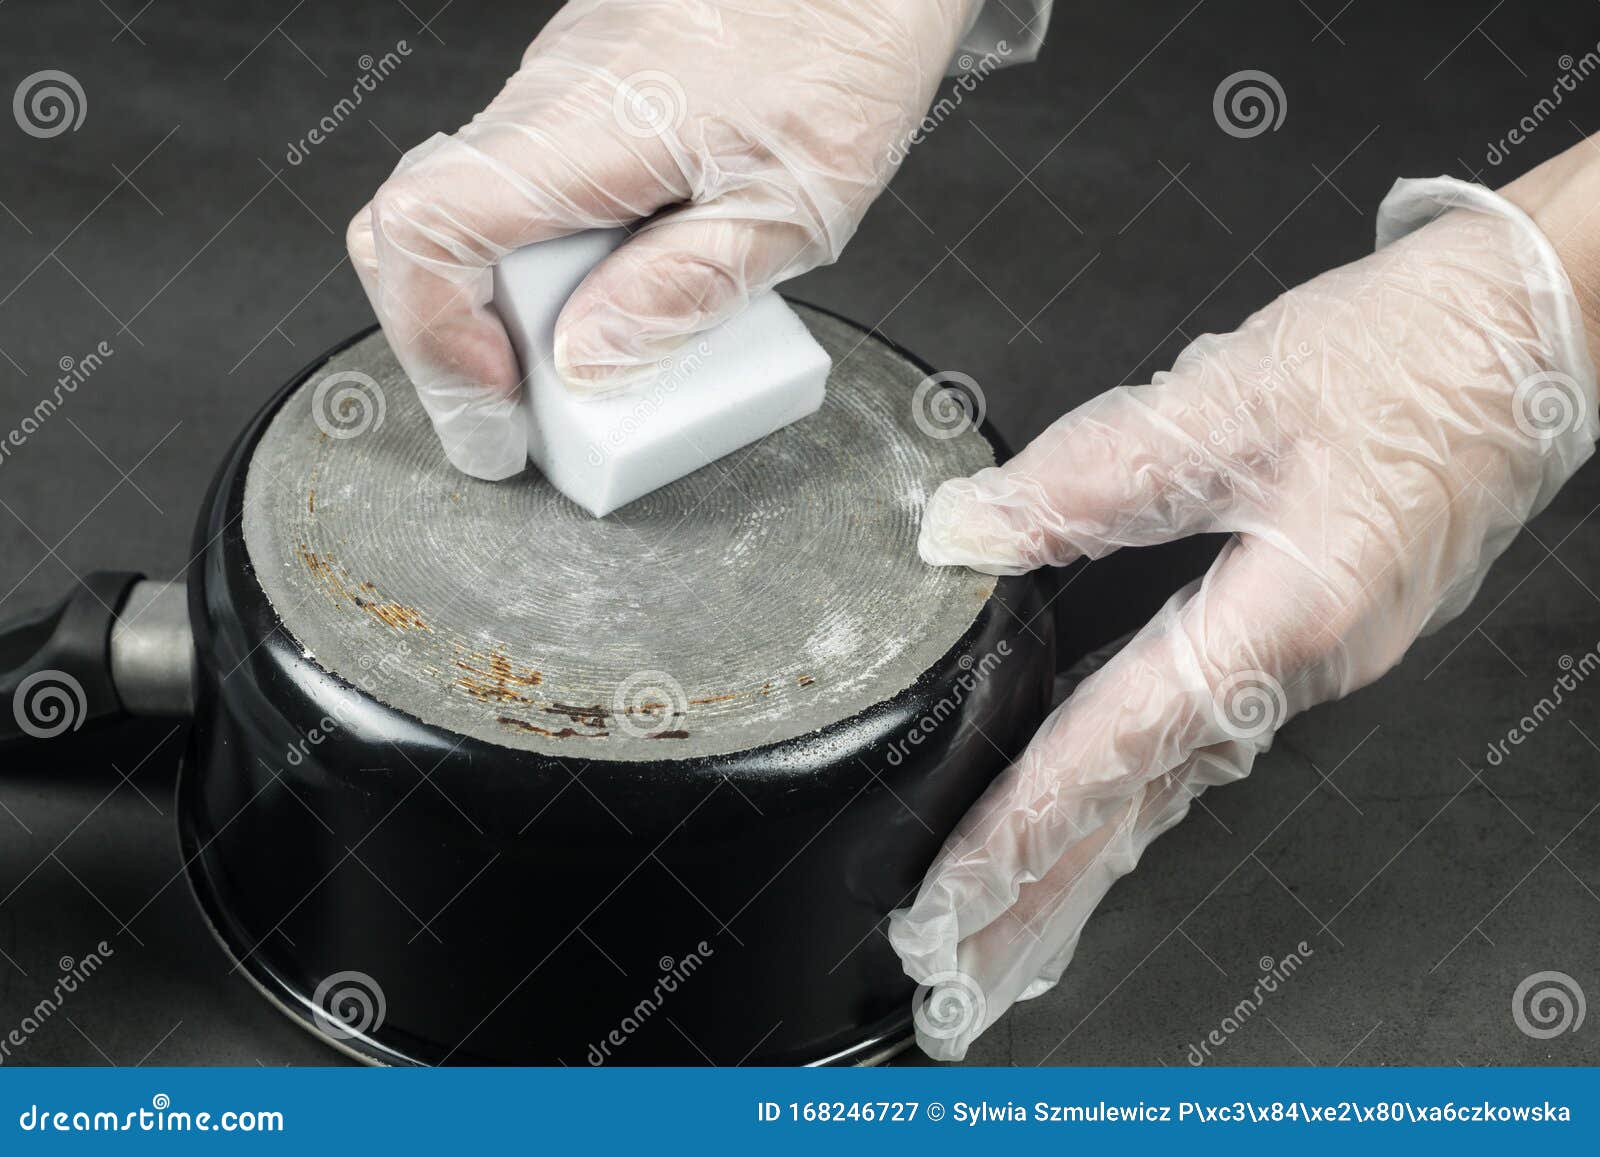 hands in gloves cleaning old pot with eco friendly magic sponge